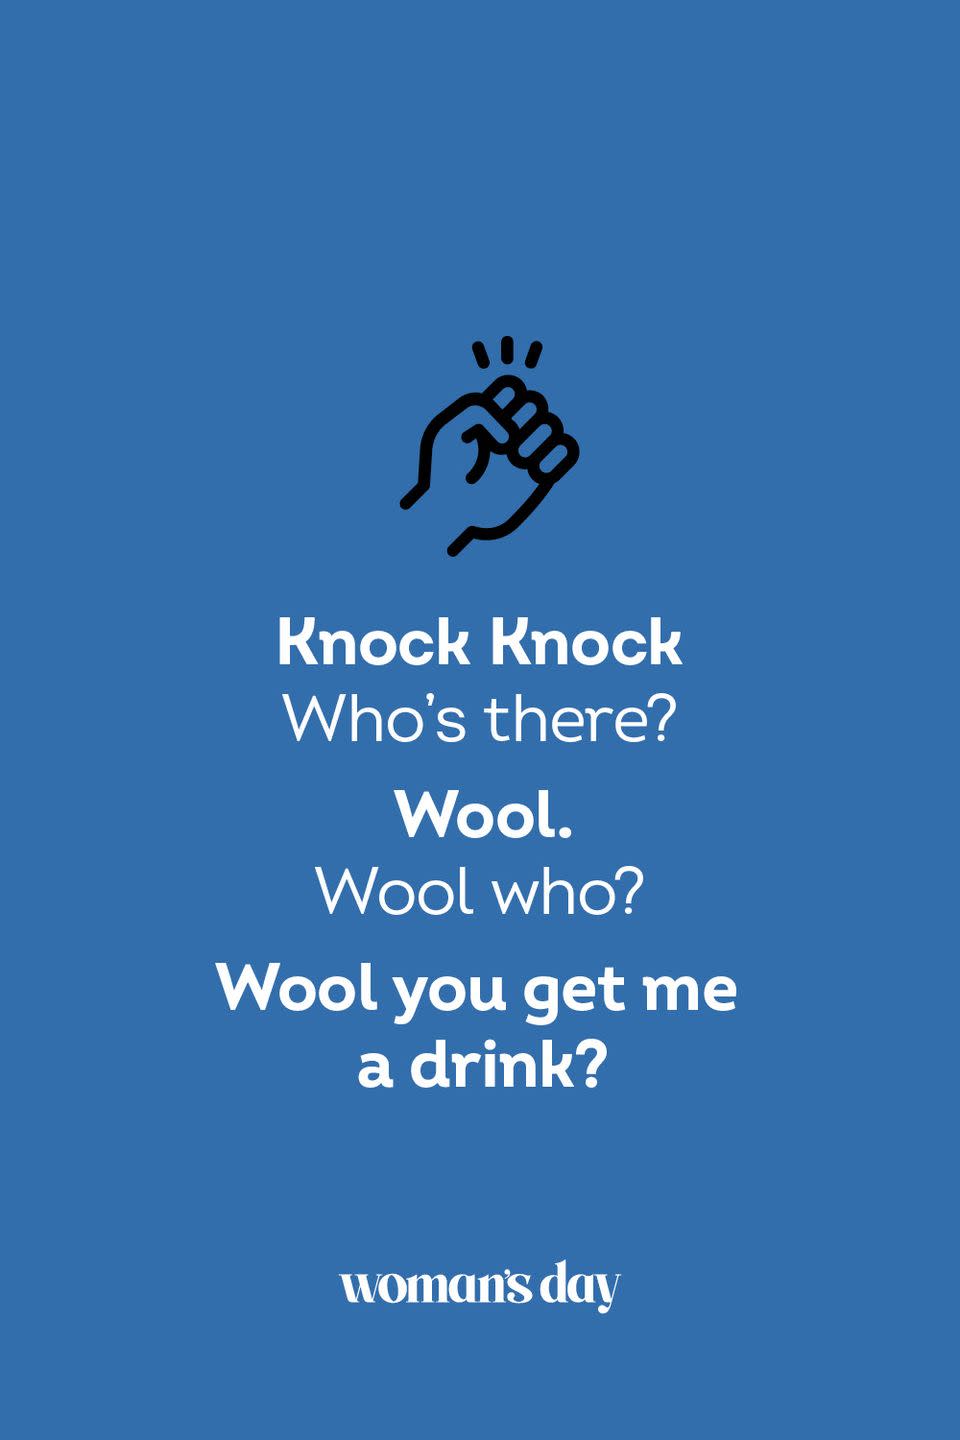 <p><strong>Knock Knock</strong></p><p><em>Who’s there? </em></p><p><em>Wool.</em></p><p><strong>Wool who?</strong></p><p><strong>Wool you get me a drink?</strong></p>